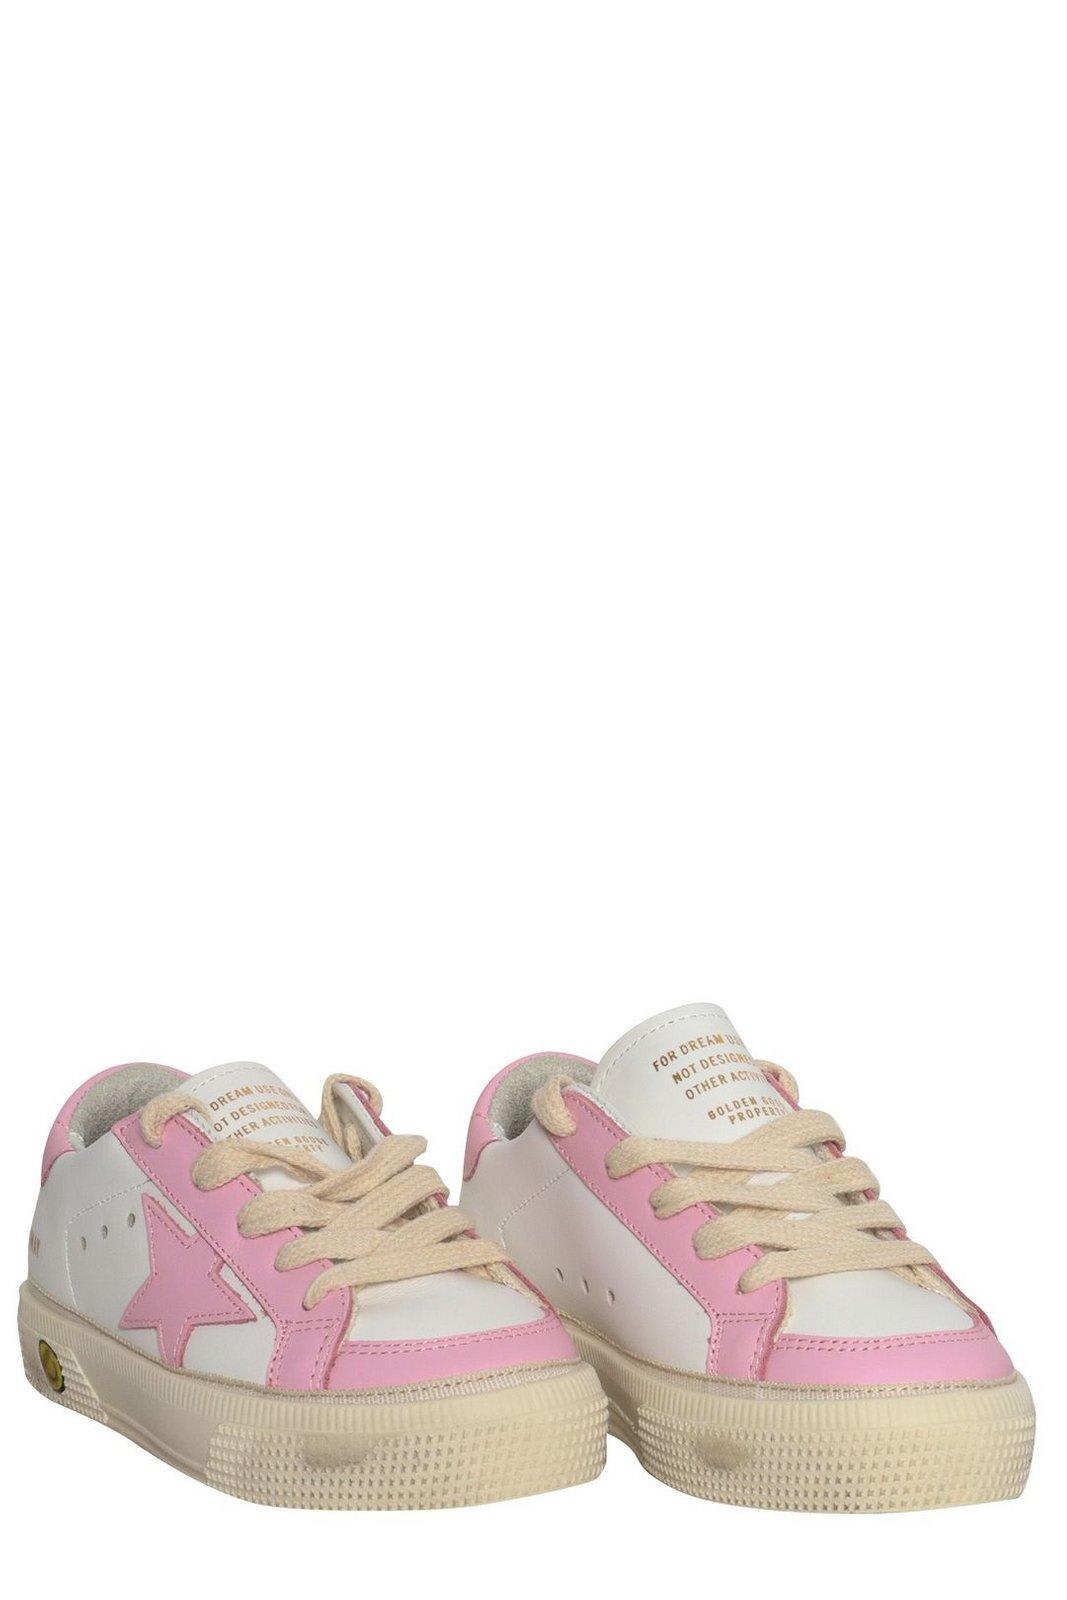 Shop Golden Goose Young May Star Patch Sneakers In White